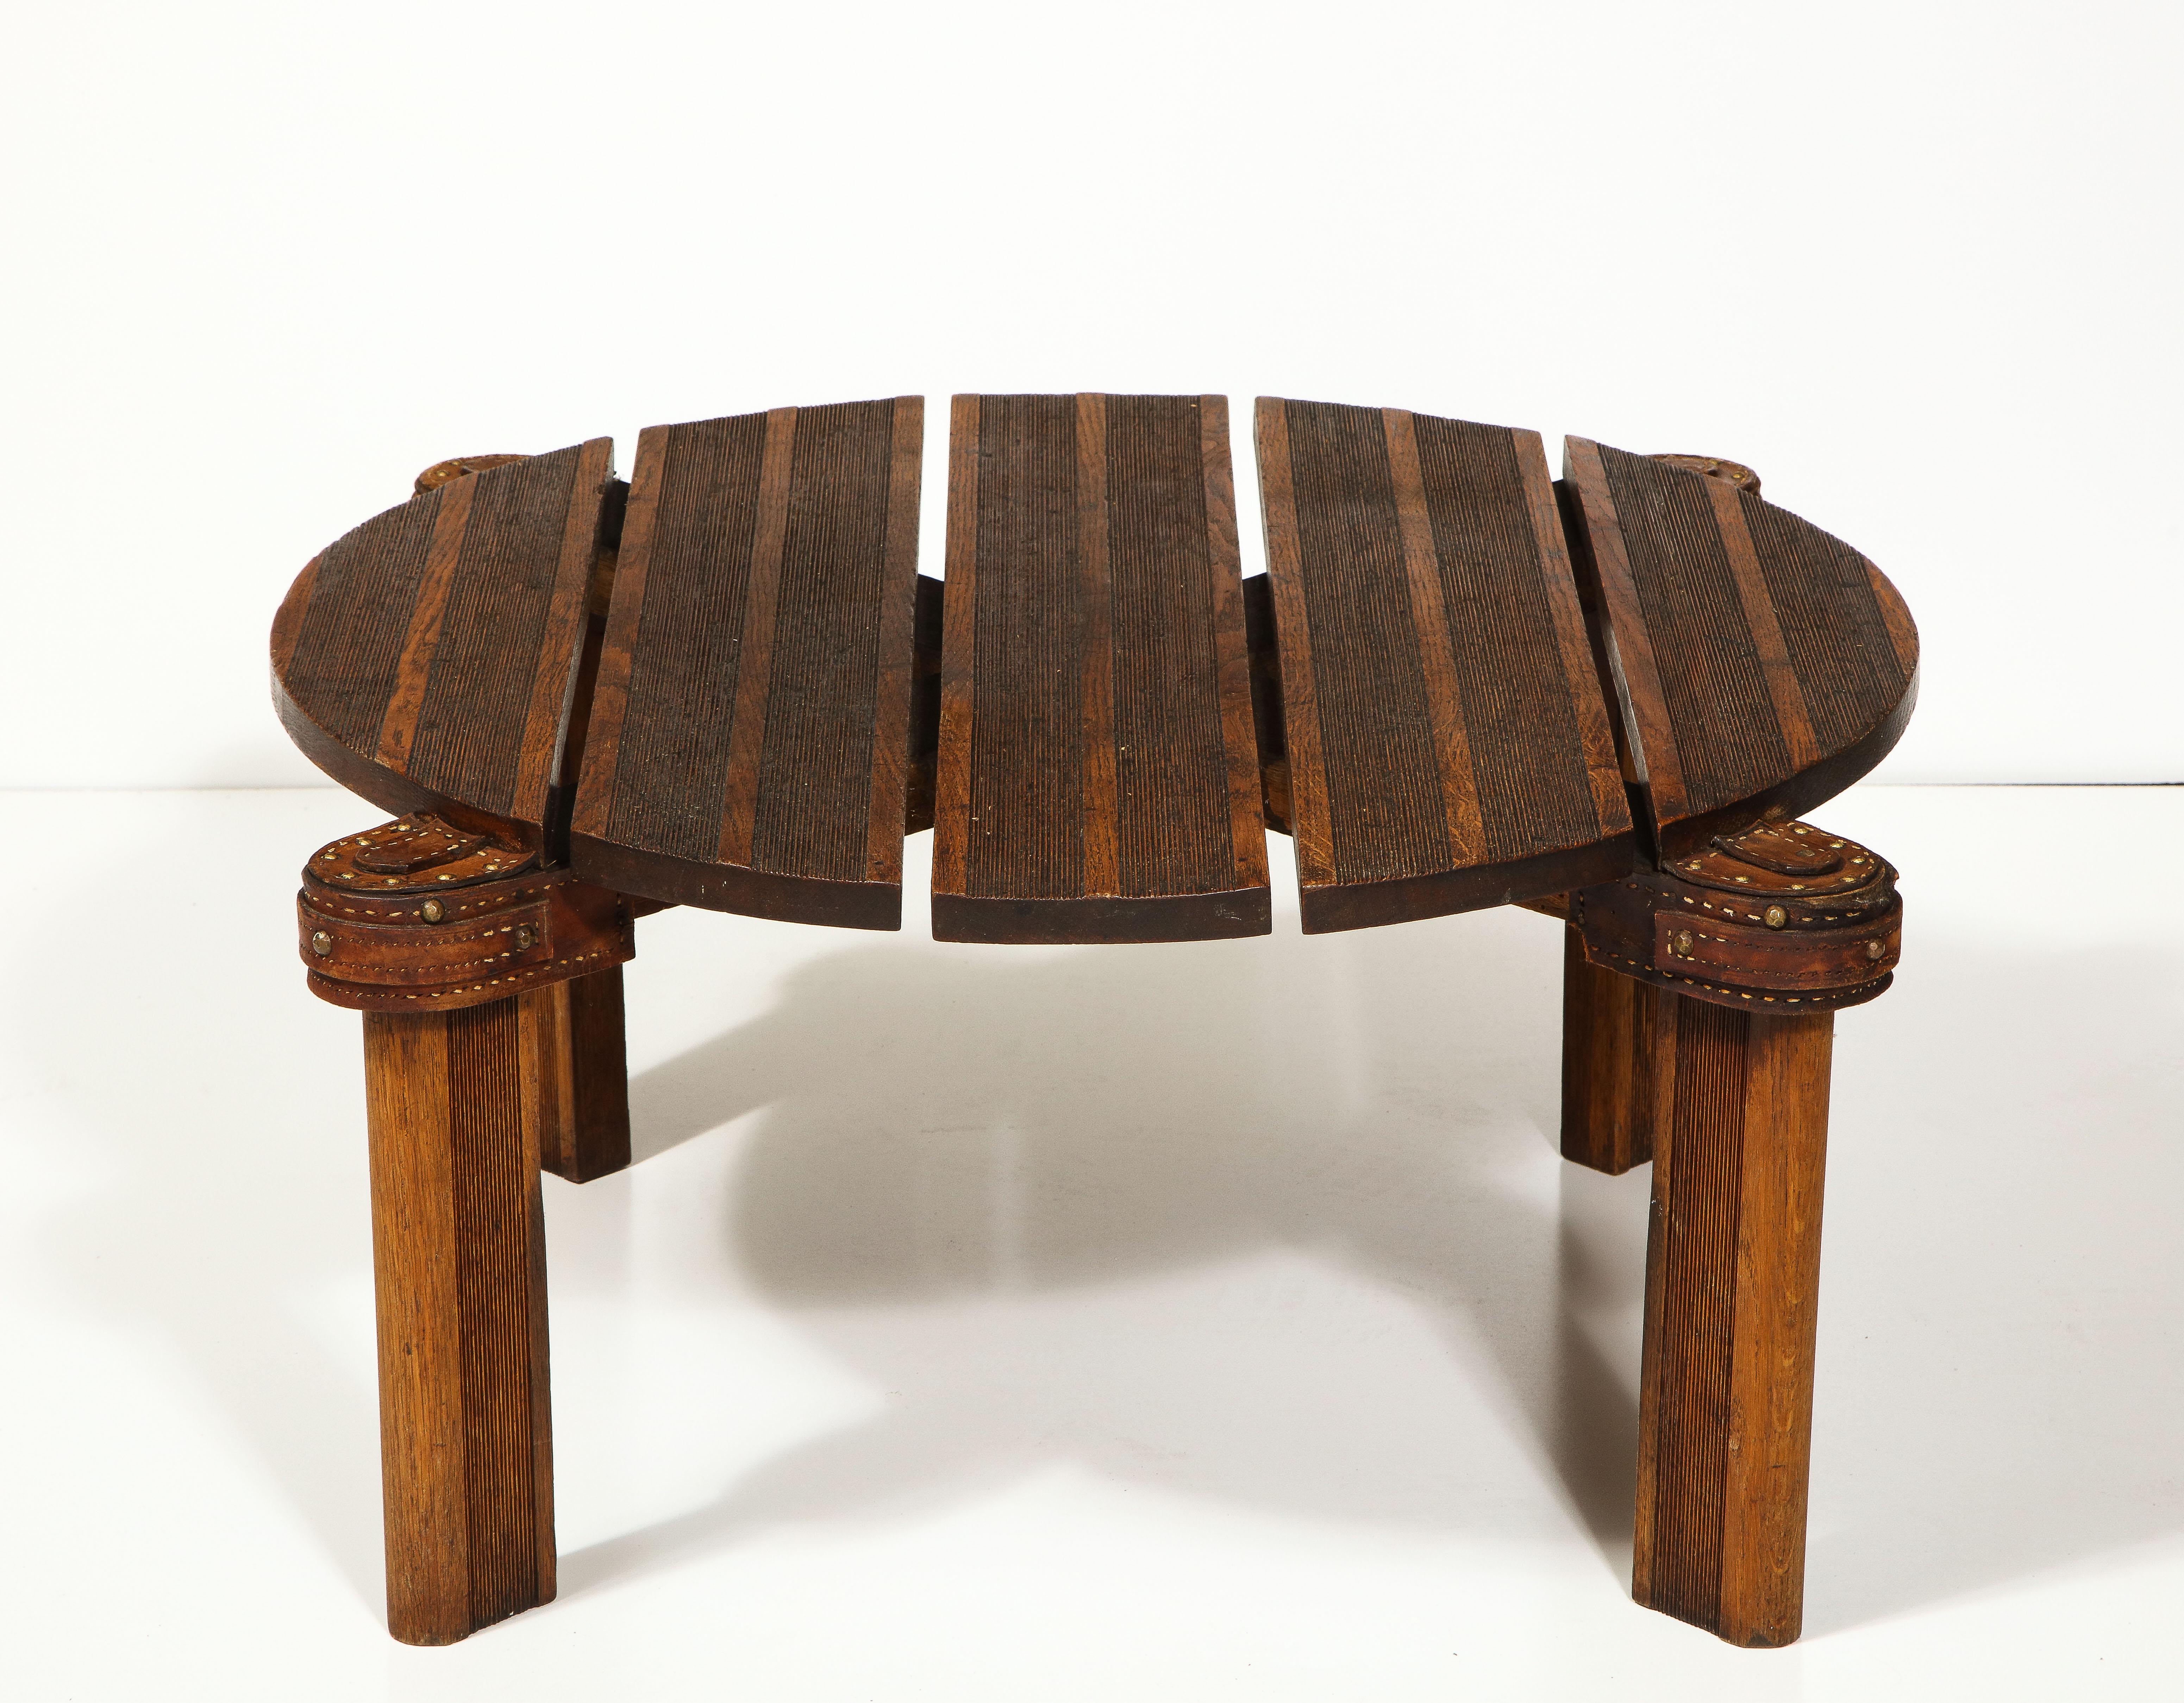 Round Oak and Leather Coffee Table by Jacques Adnet, France, c. Mid-20th Century For Sale 4